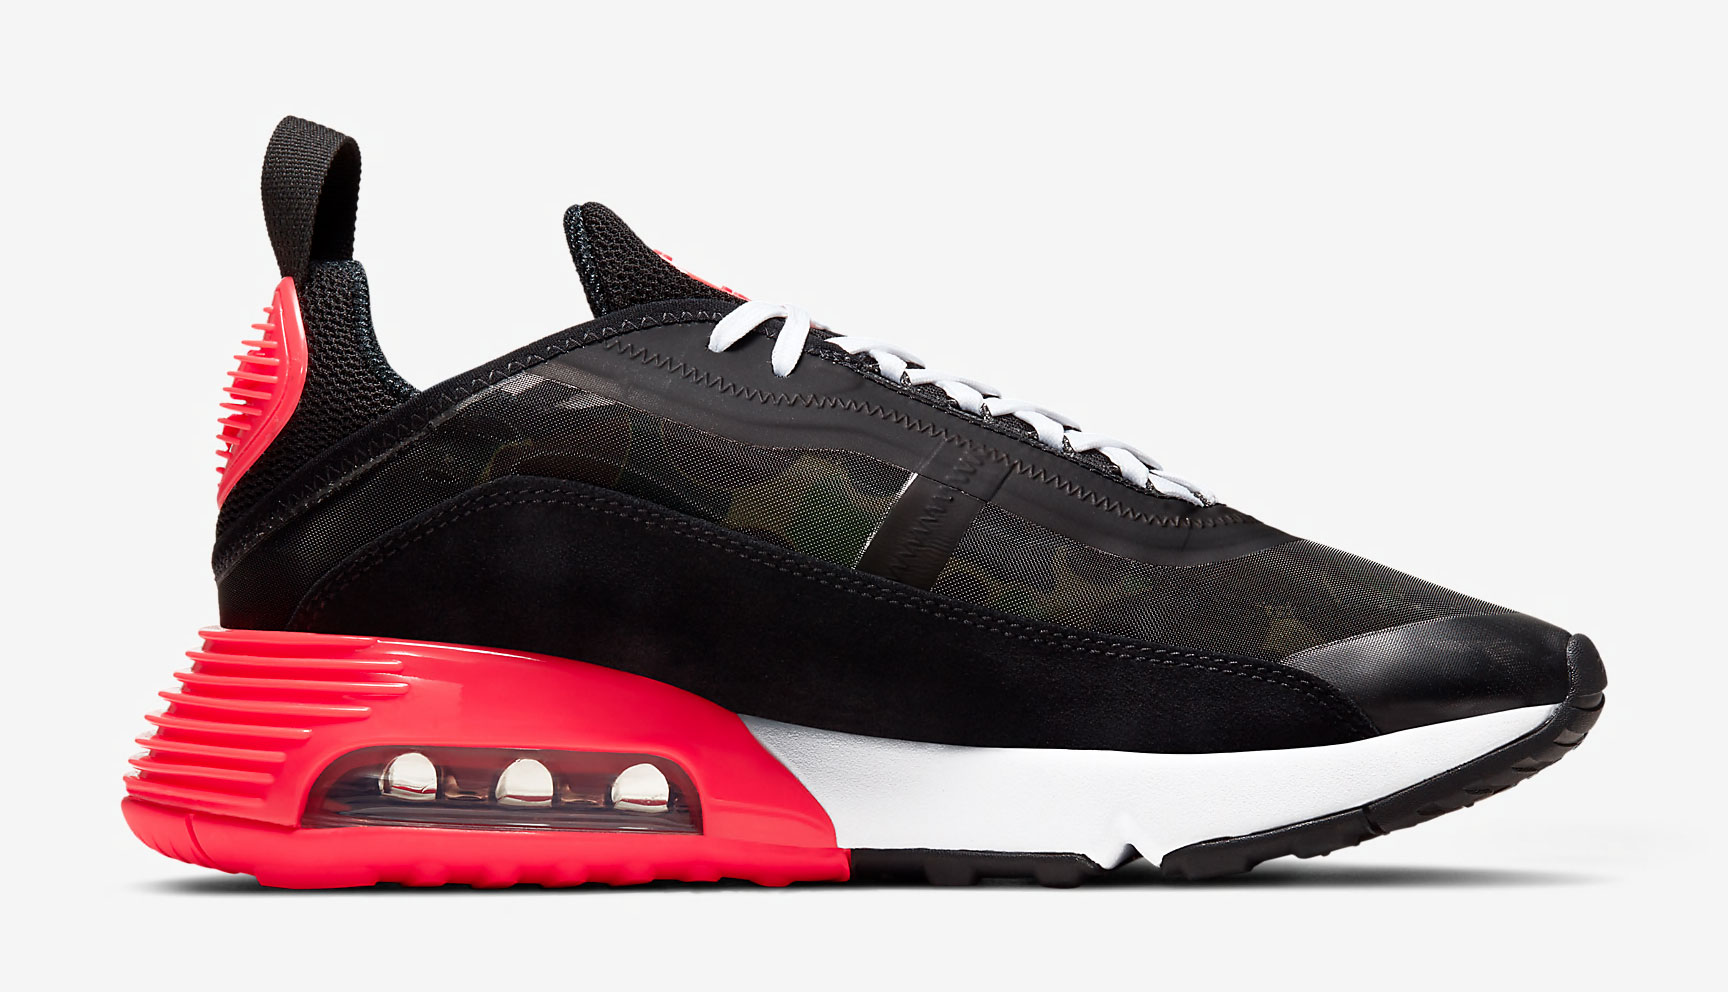 nike-air-max-2090-infrared-duck-camo-release-date-3